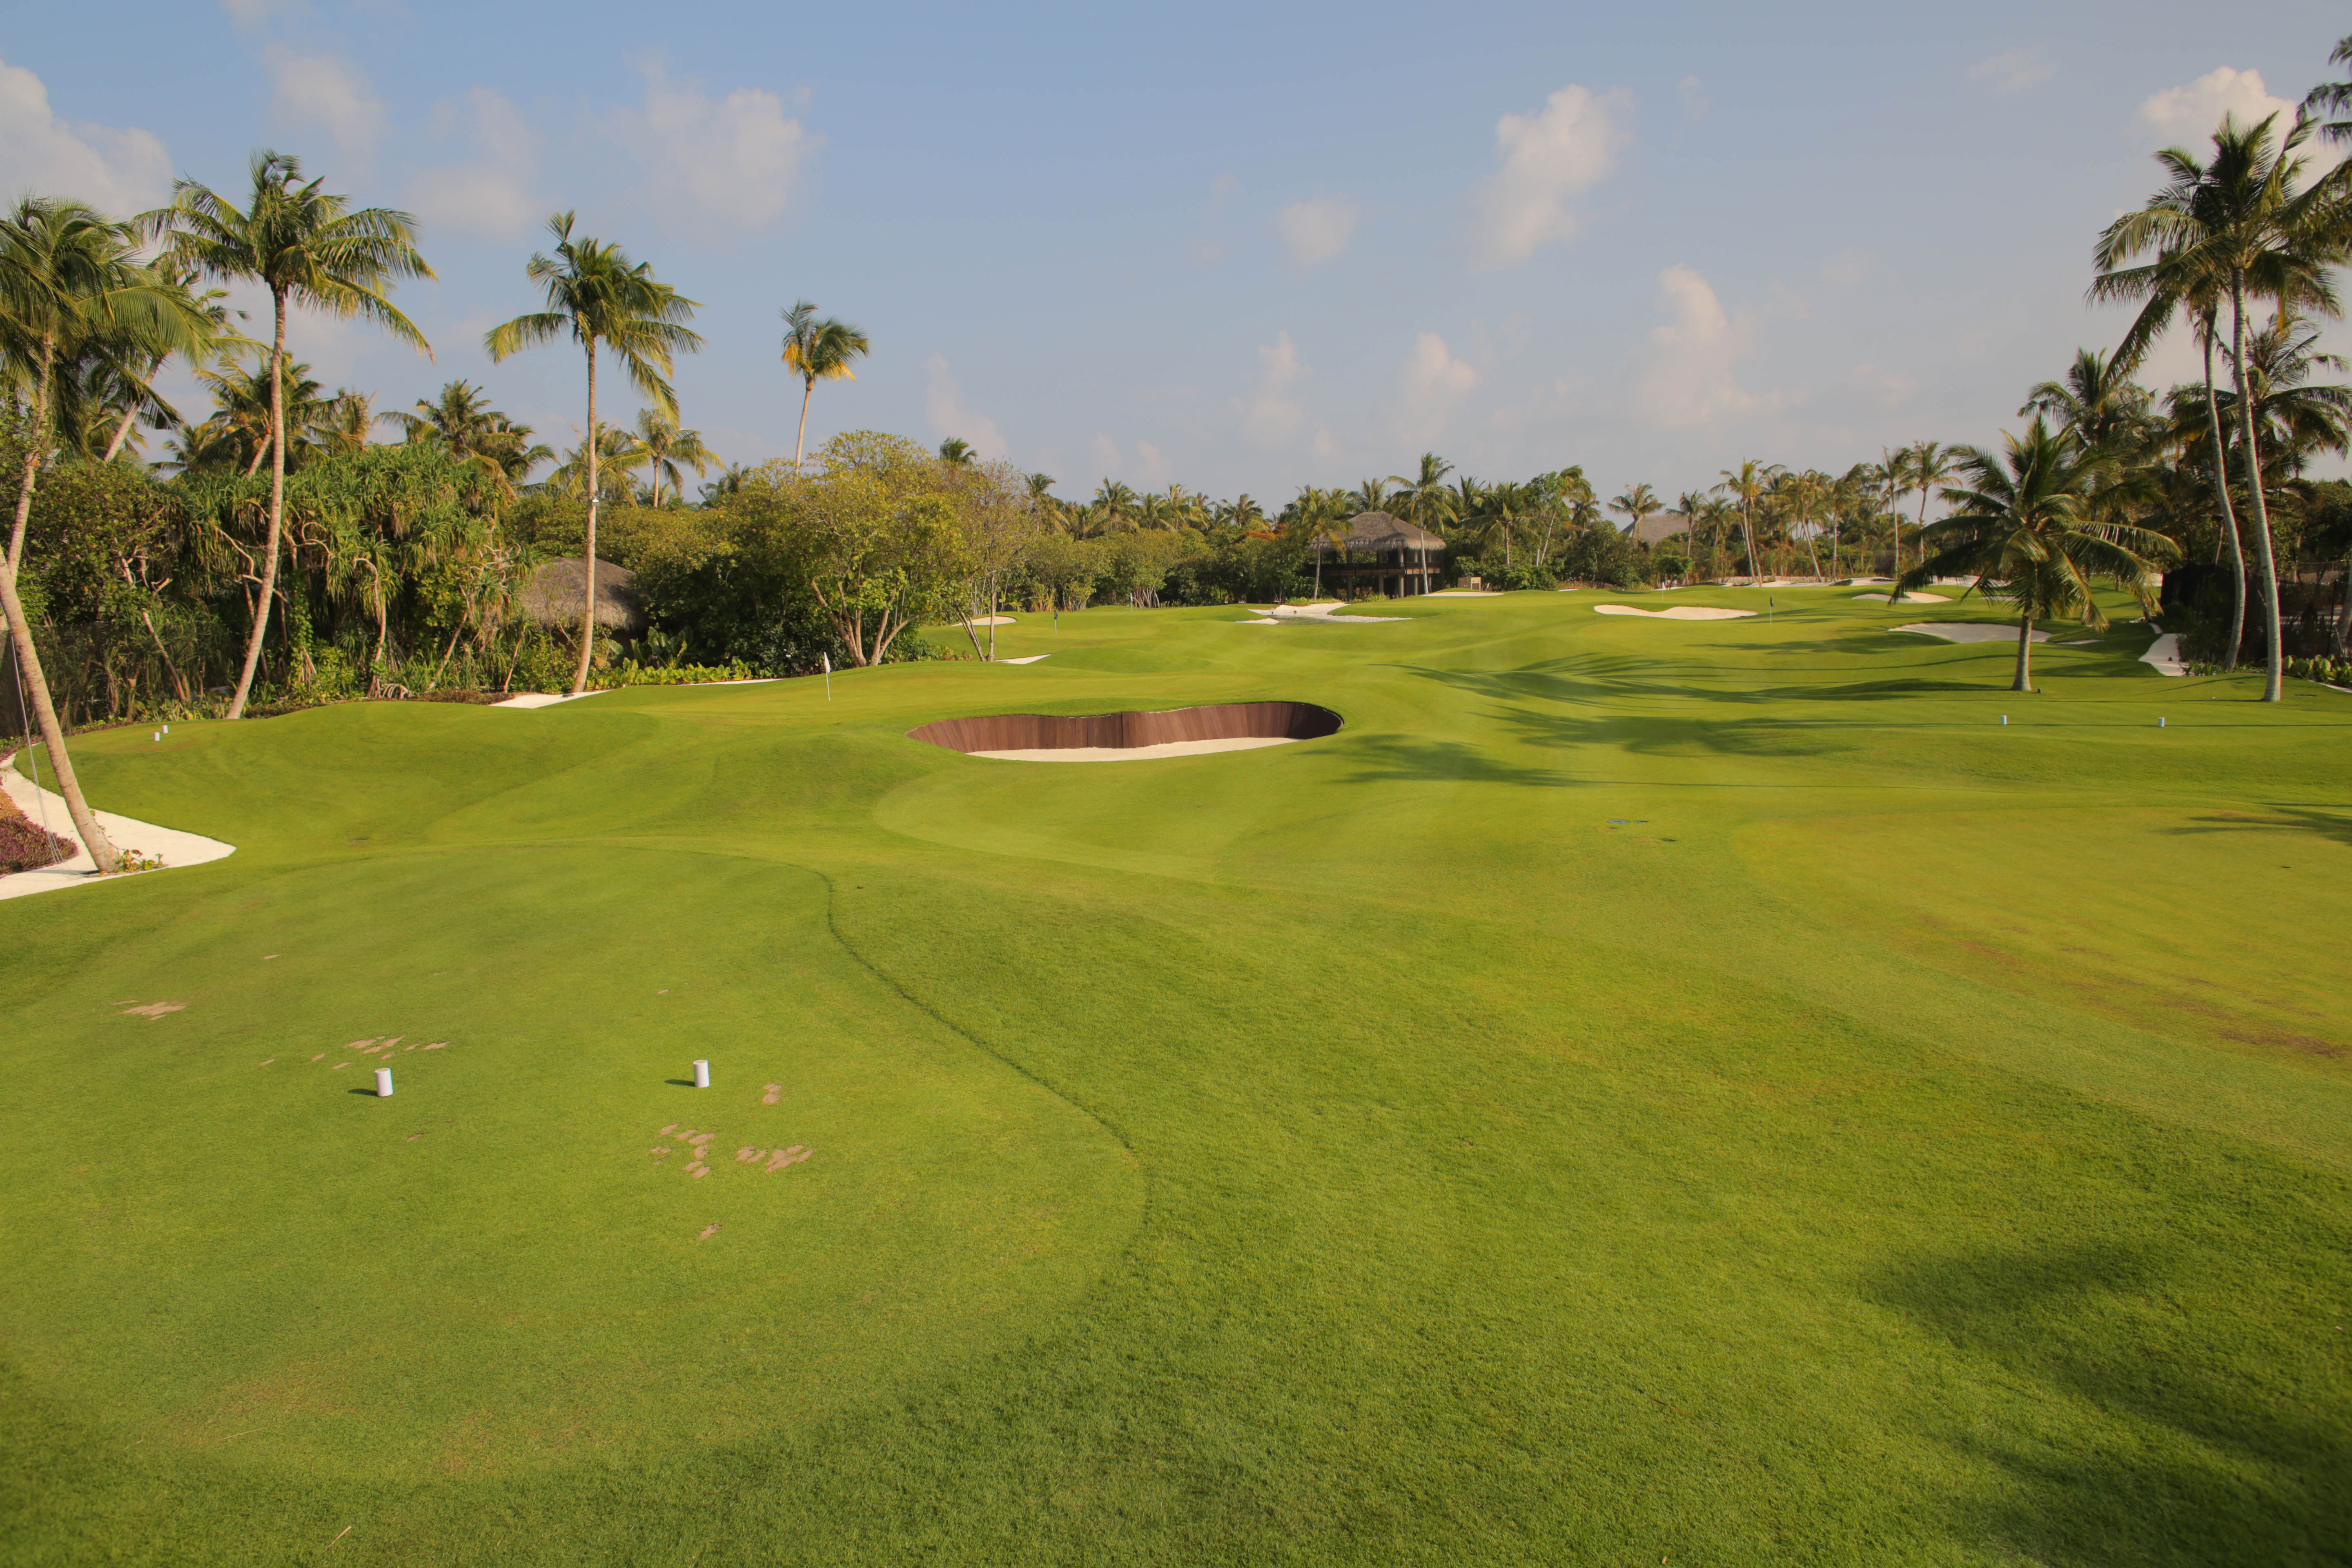 Velaa private island opens world's most exclusive golf academy